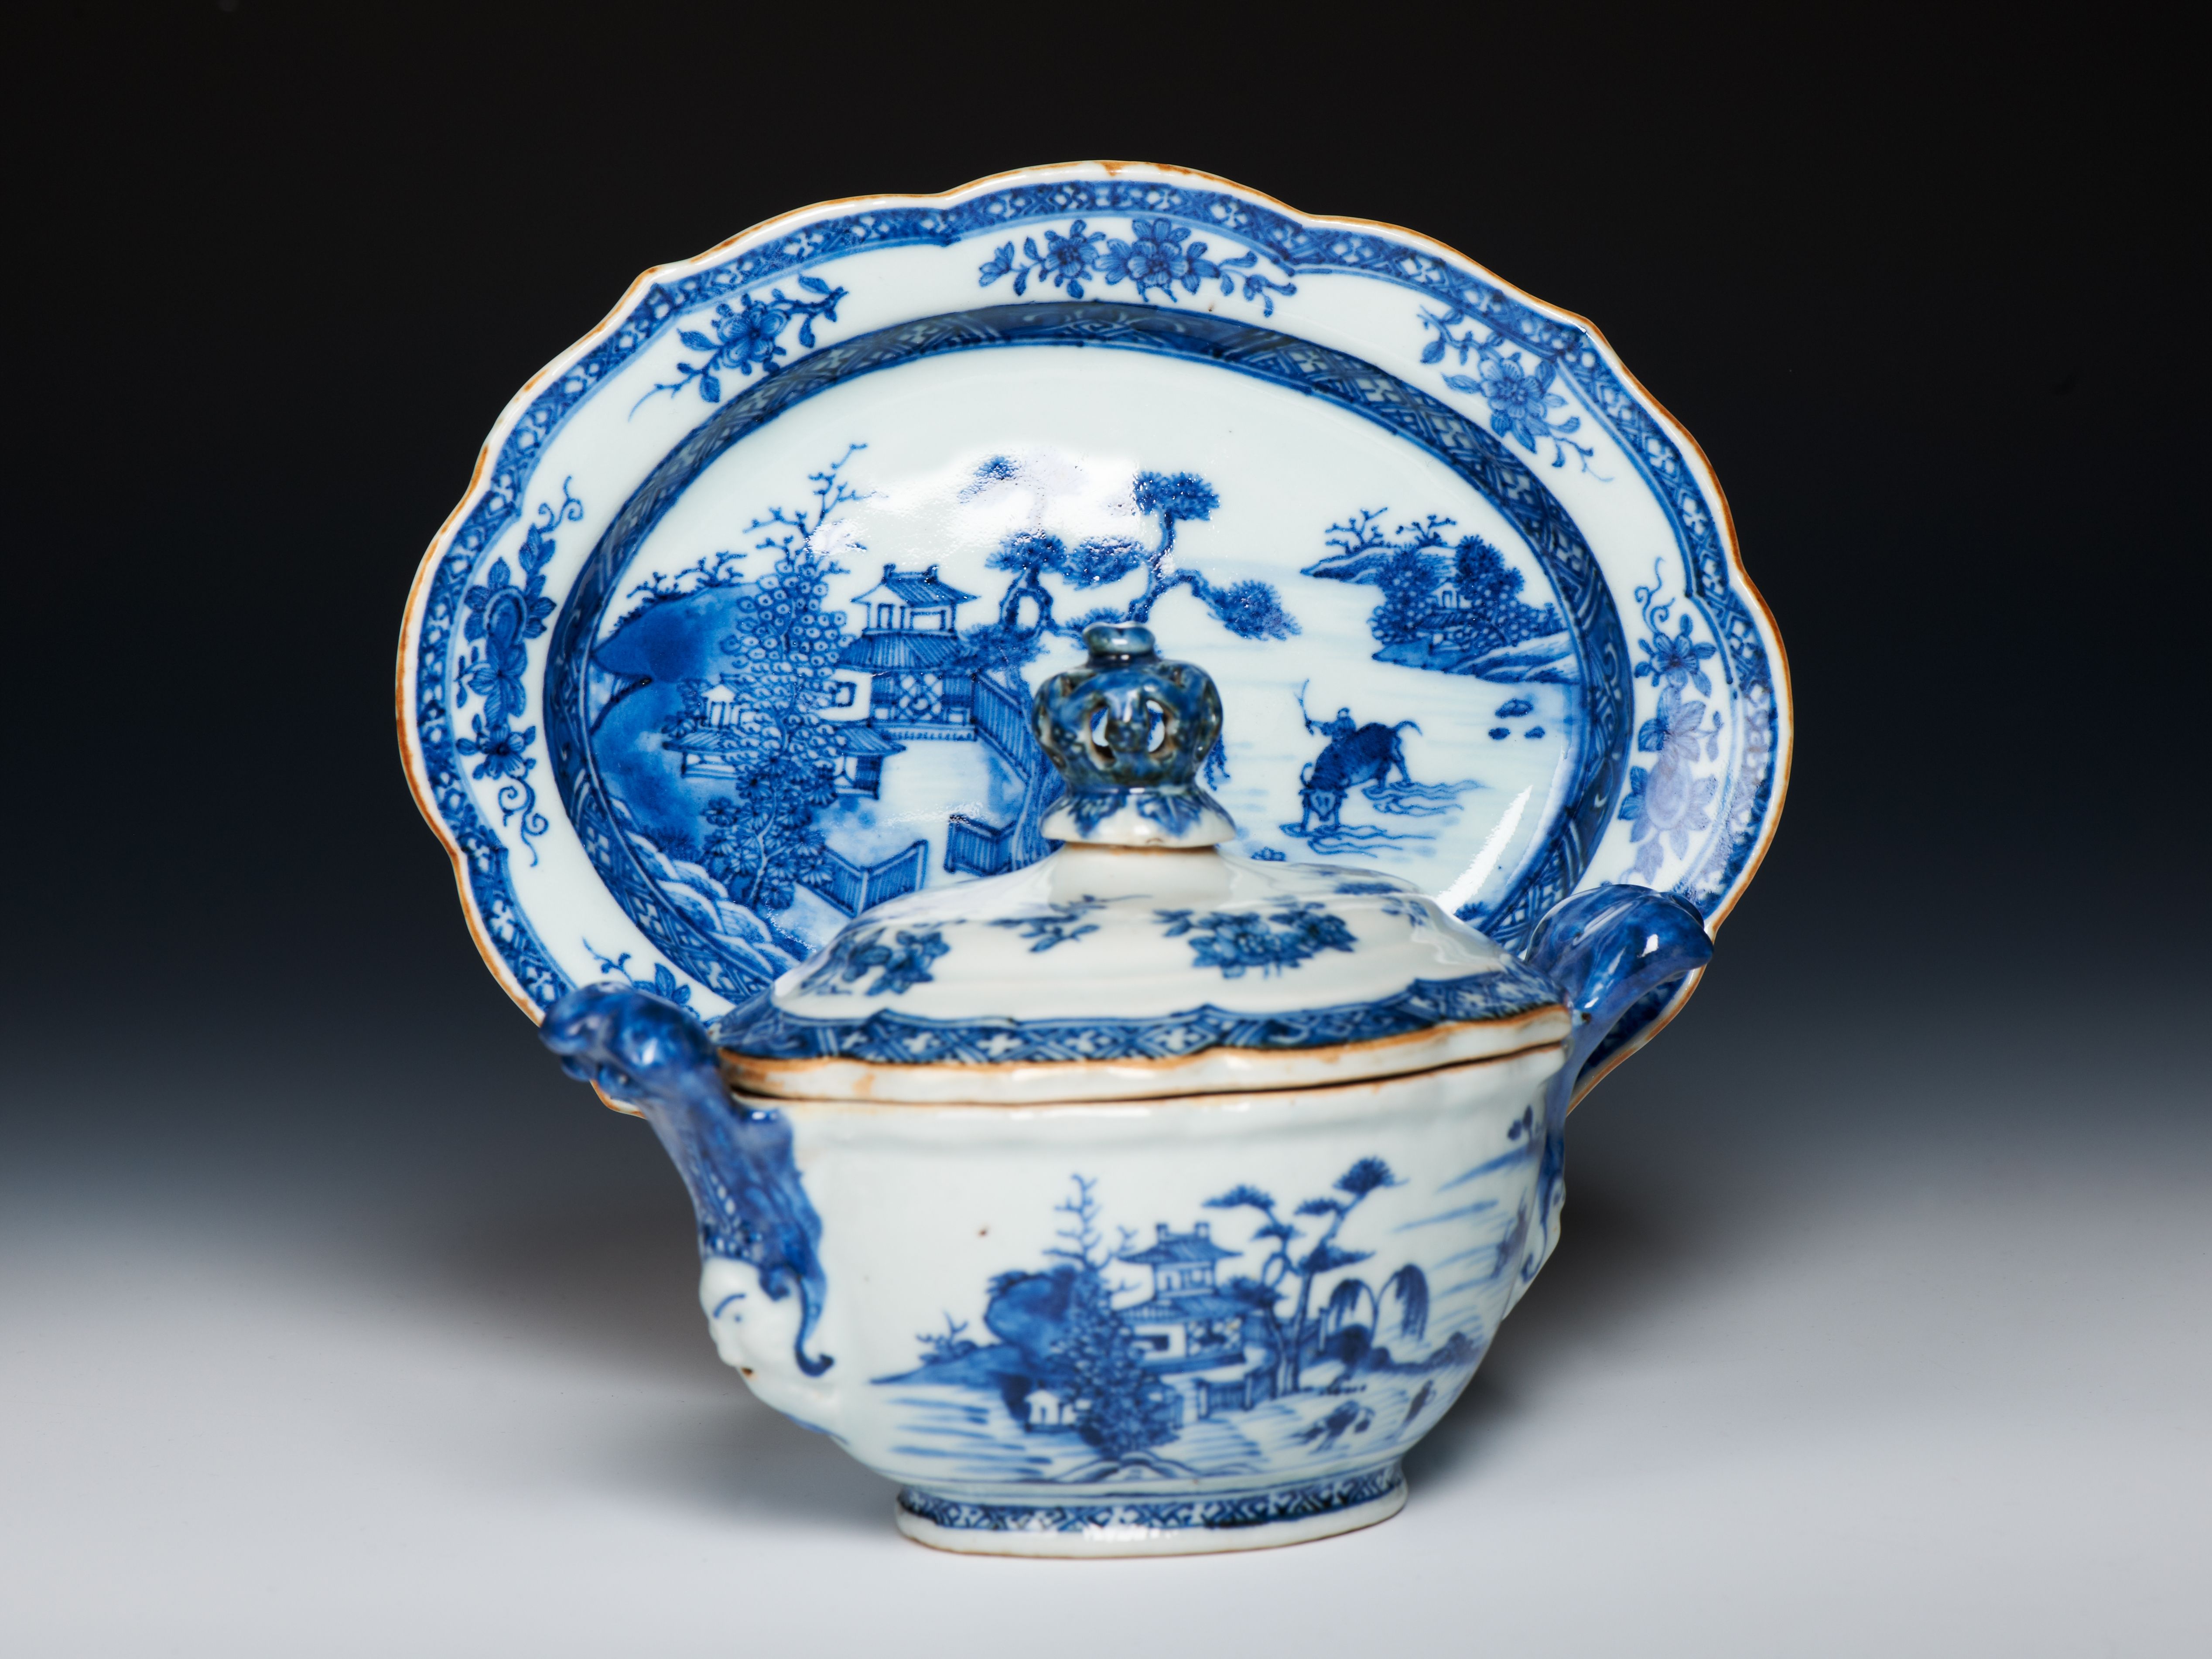 Chinese porcelain sauce tureen, crown finial and mask handles 